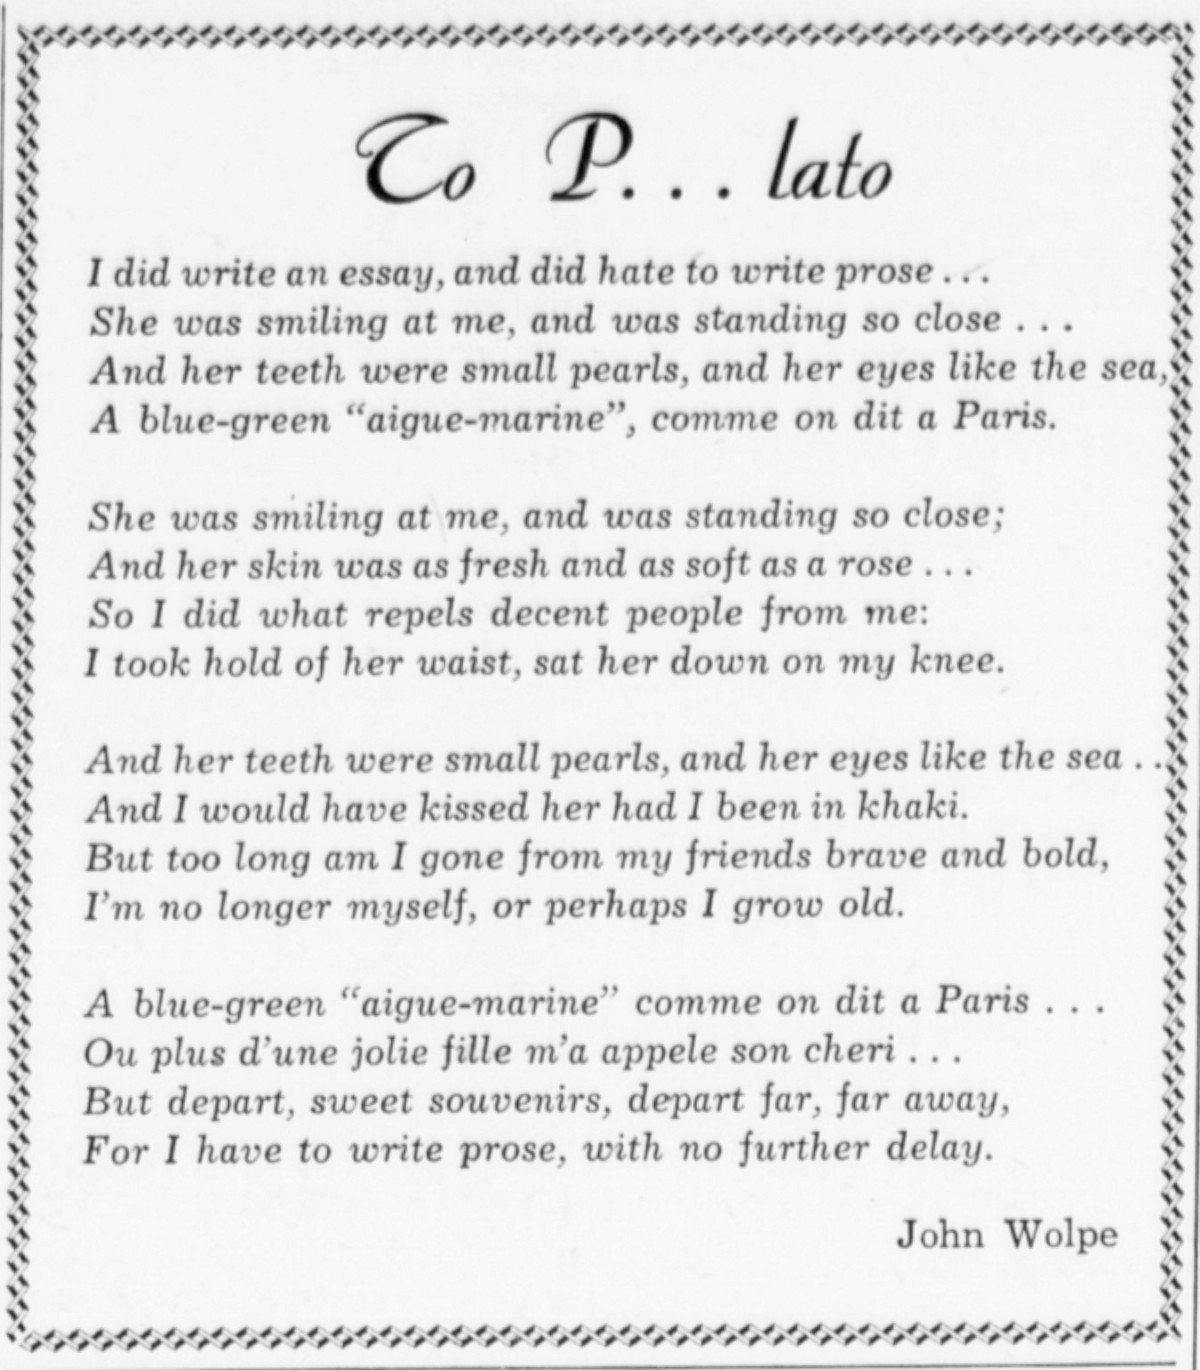 Poem titled "To Plato." // The Manitoban, March 11, 1947, p.3.